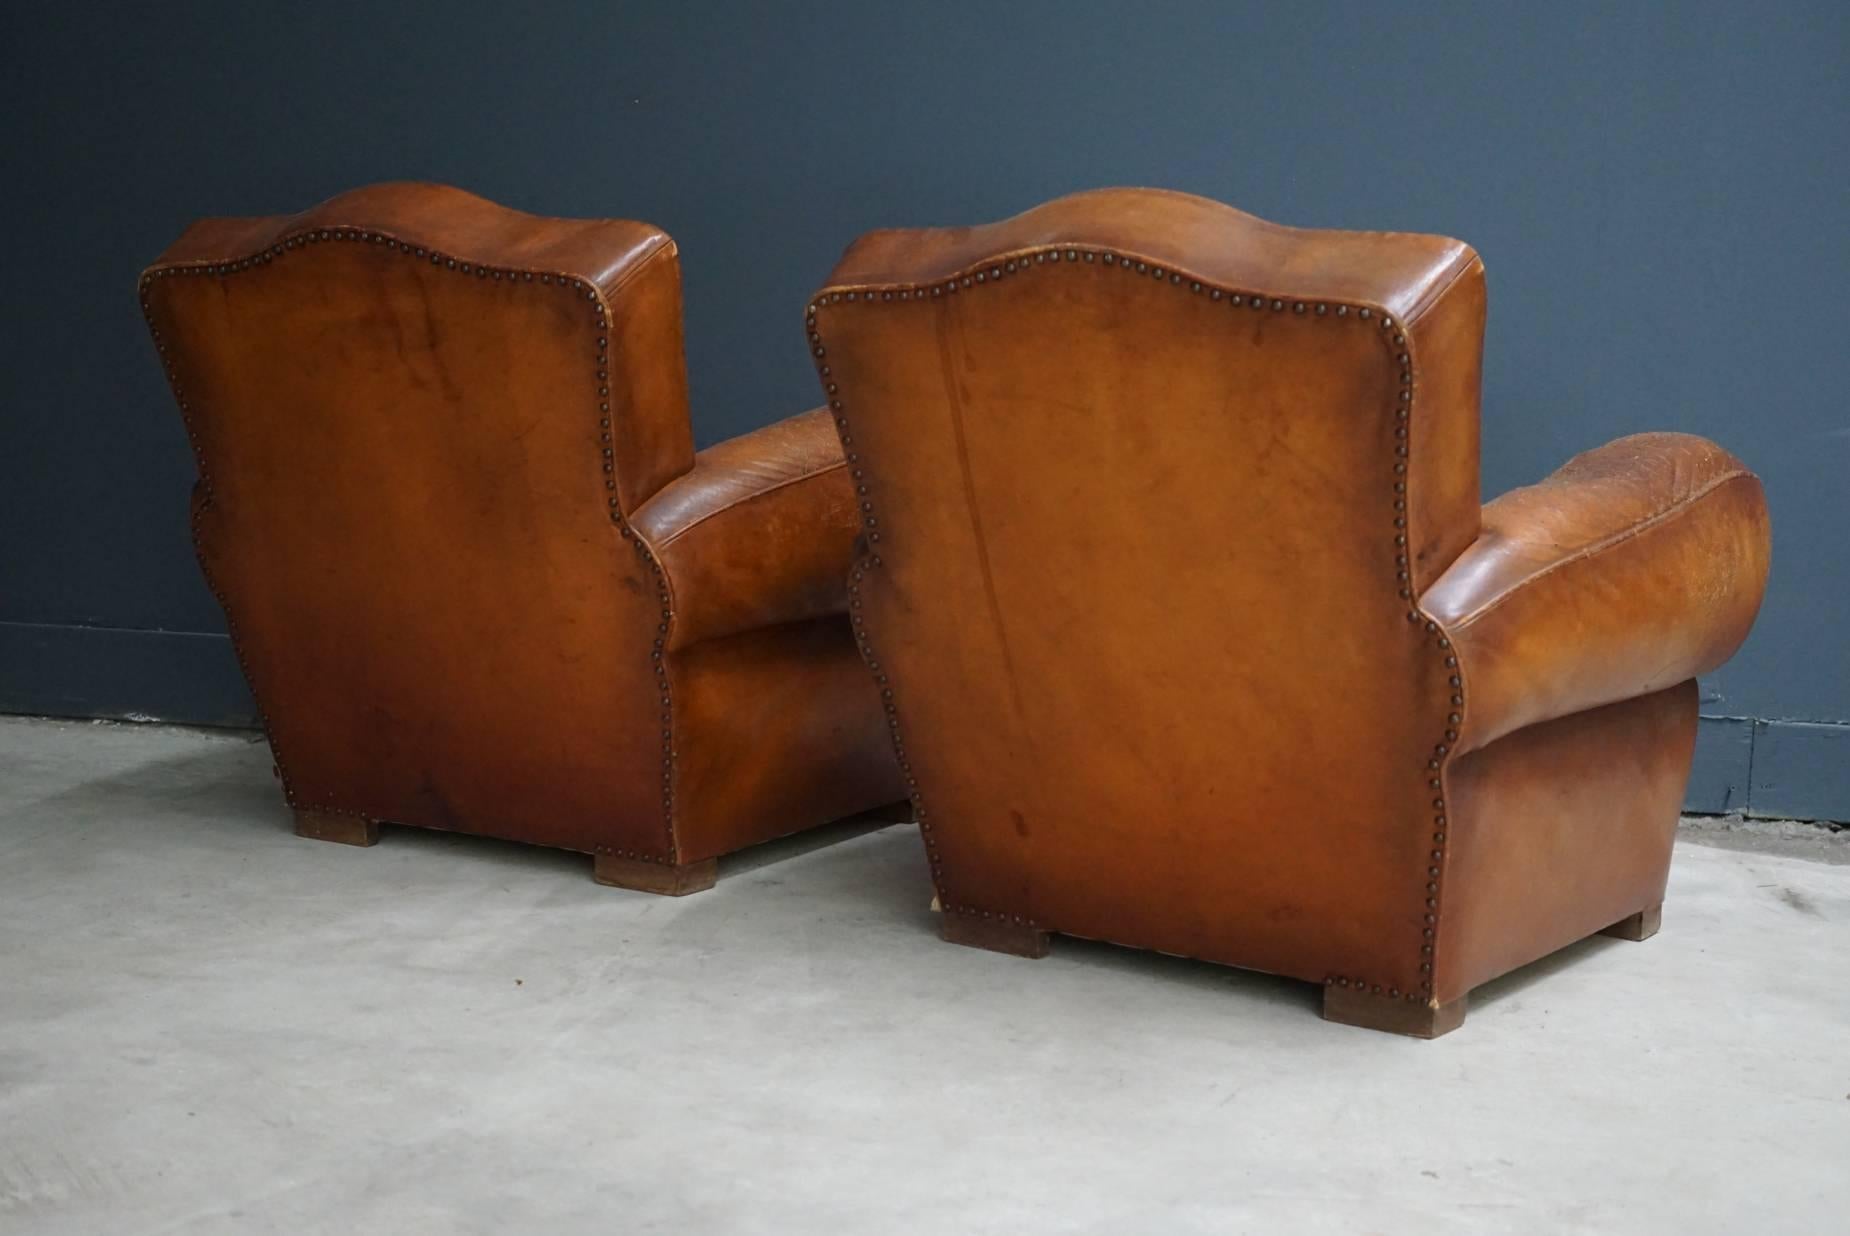 These club chairs were designed and produced in France during the 1940s. The chairs are made from cognac leather held together with metal pins and mounted on wooden legs. The chairs are in a vintage well used condition.
  